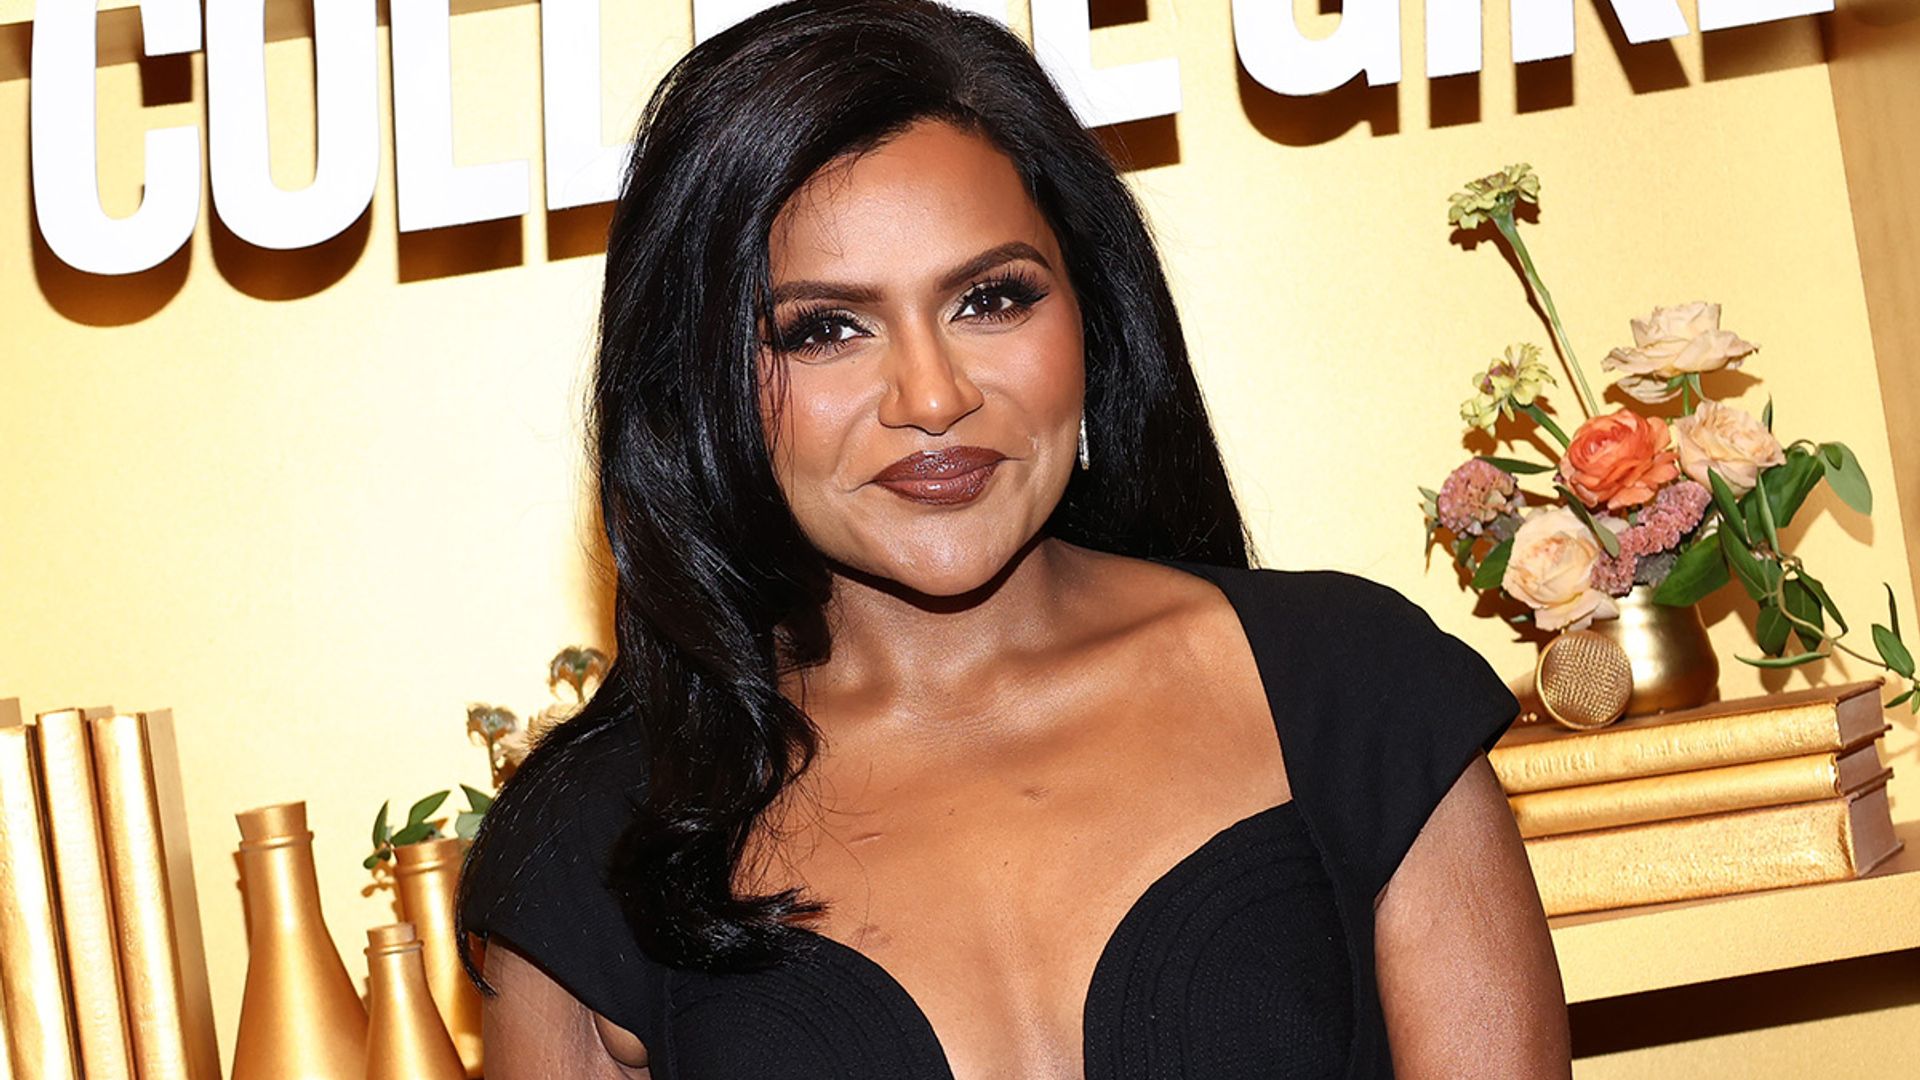 mindy-kaling-weight-loss-her-secrets-revealed-after-unrecognizable